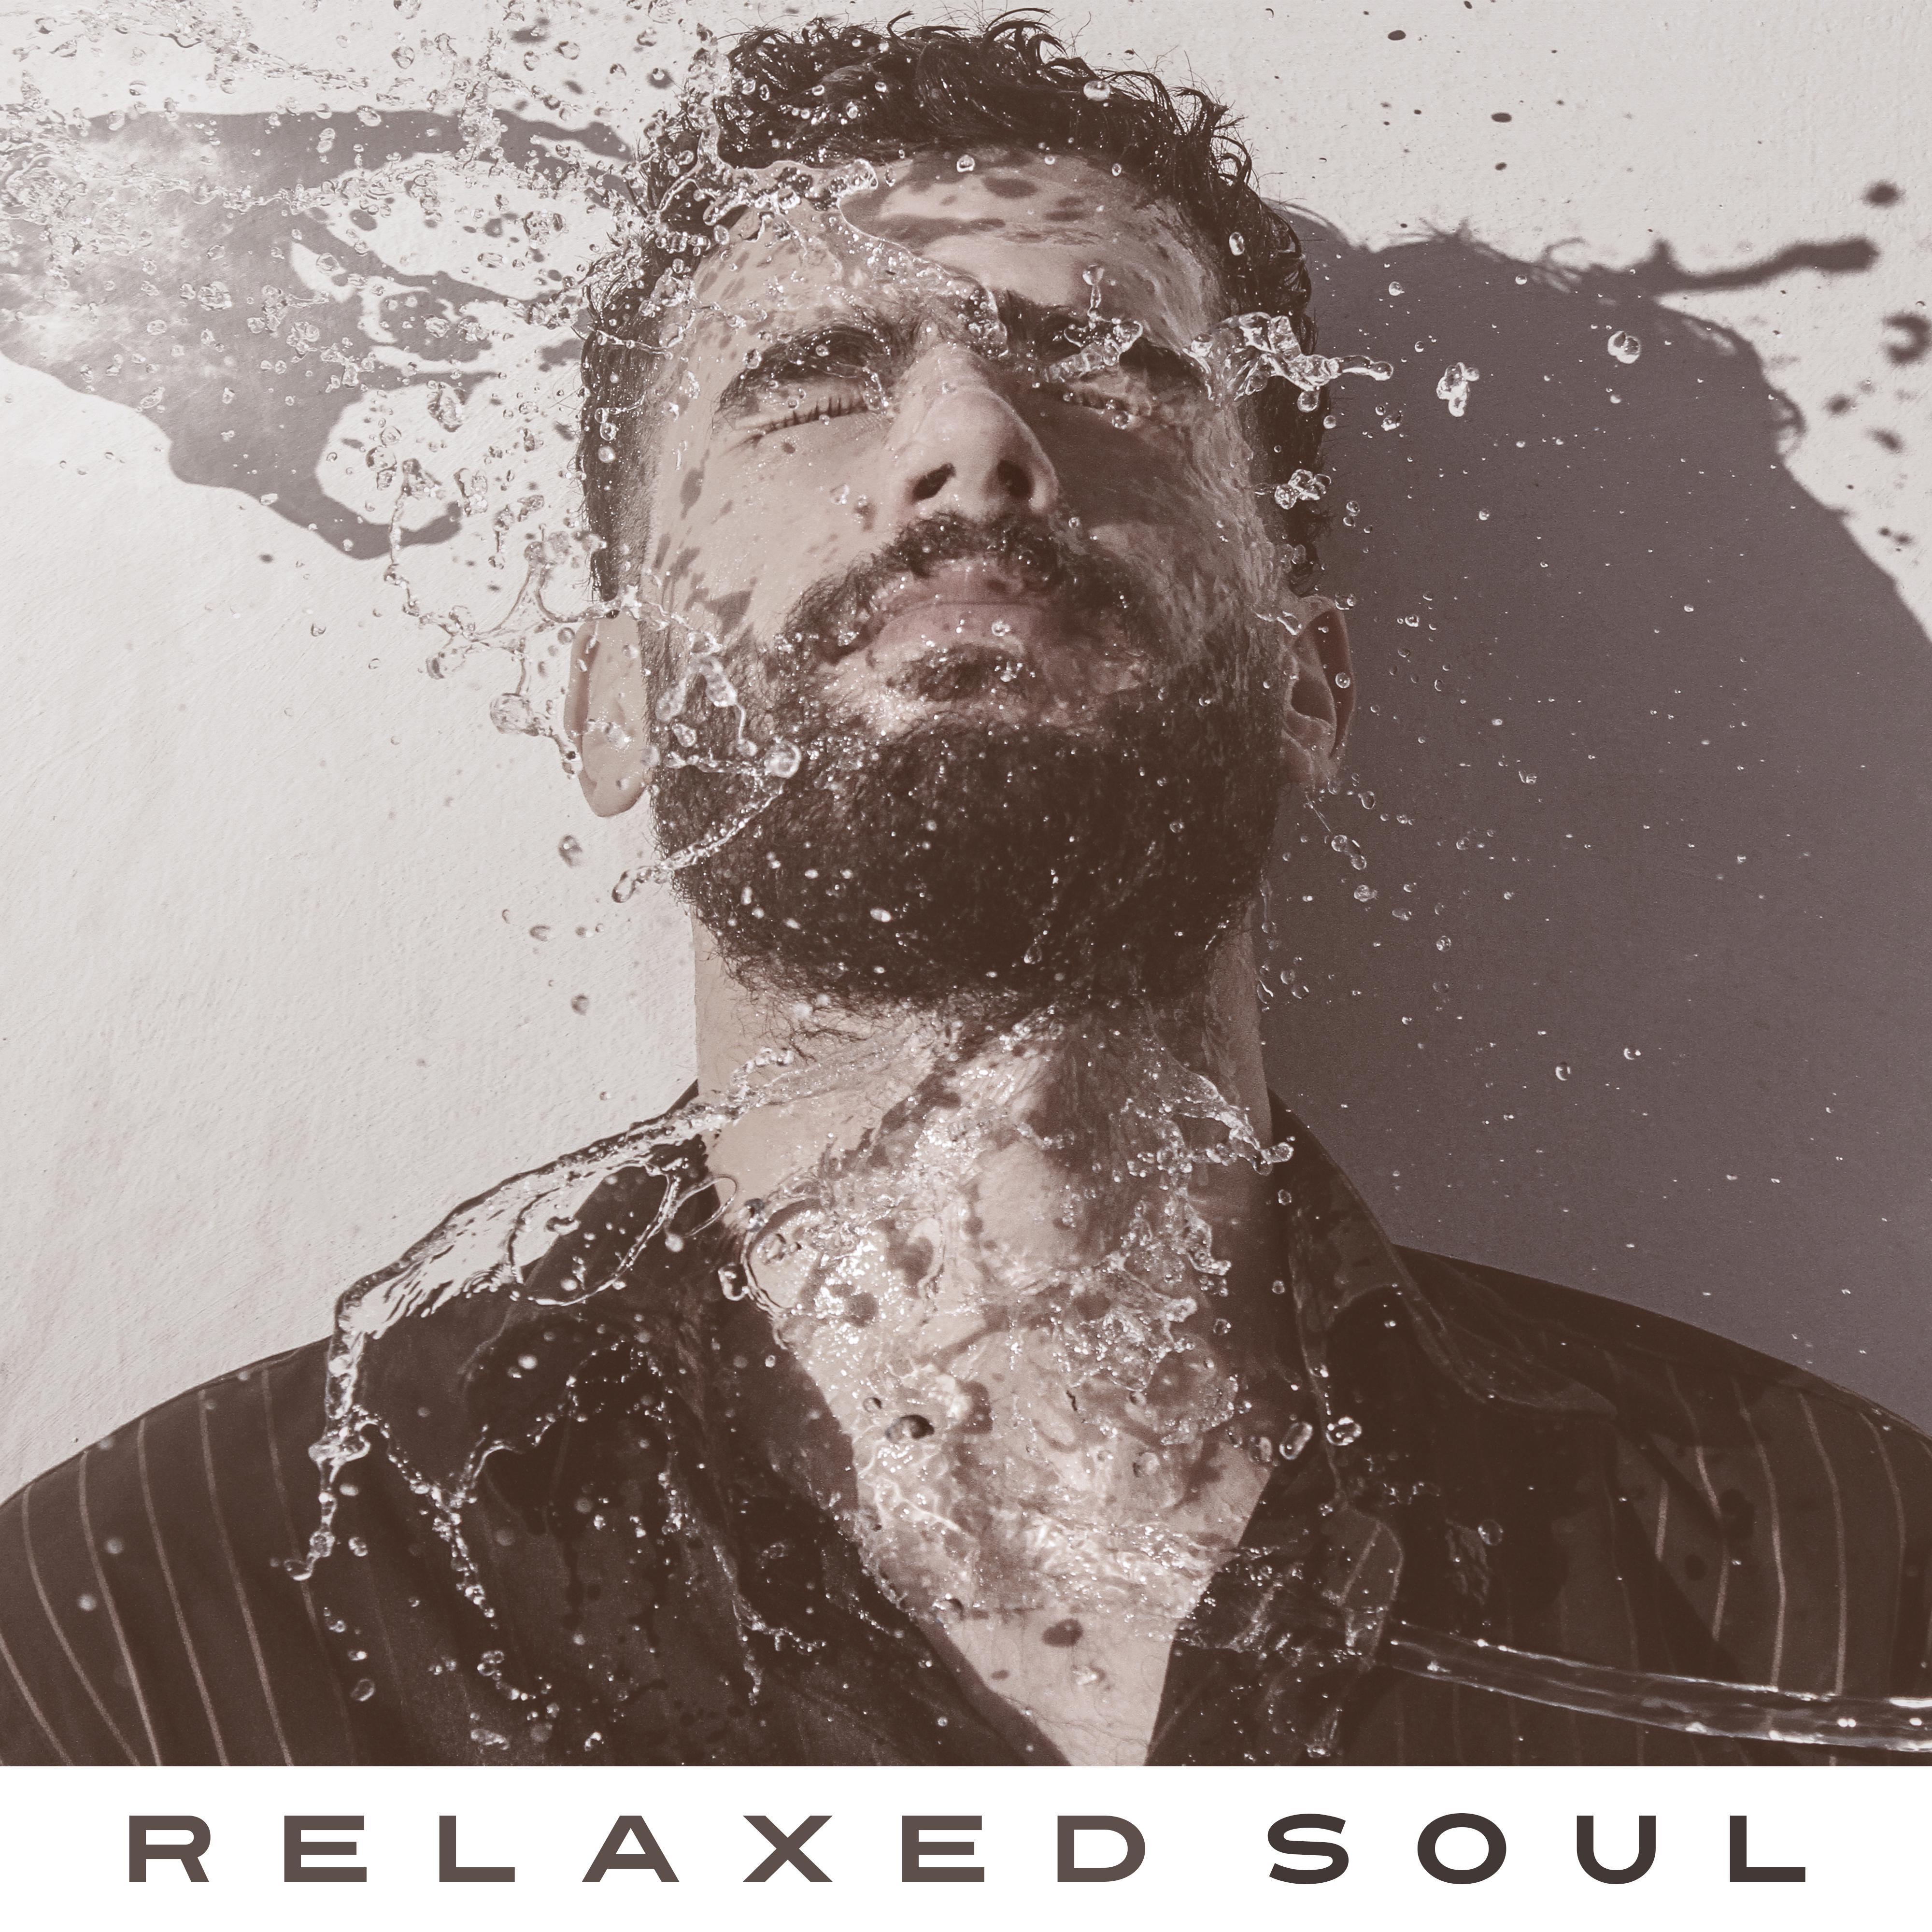 Relaxed Soul – Calm Jazz for Relaxation, Healing Sounds, Chilled Jazz, Pure Sleep, Rest, Night Jazz, Peaceful Mind, Smooth Jazz